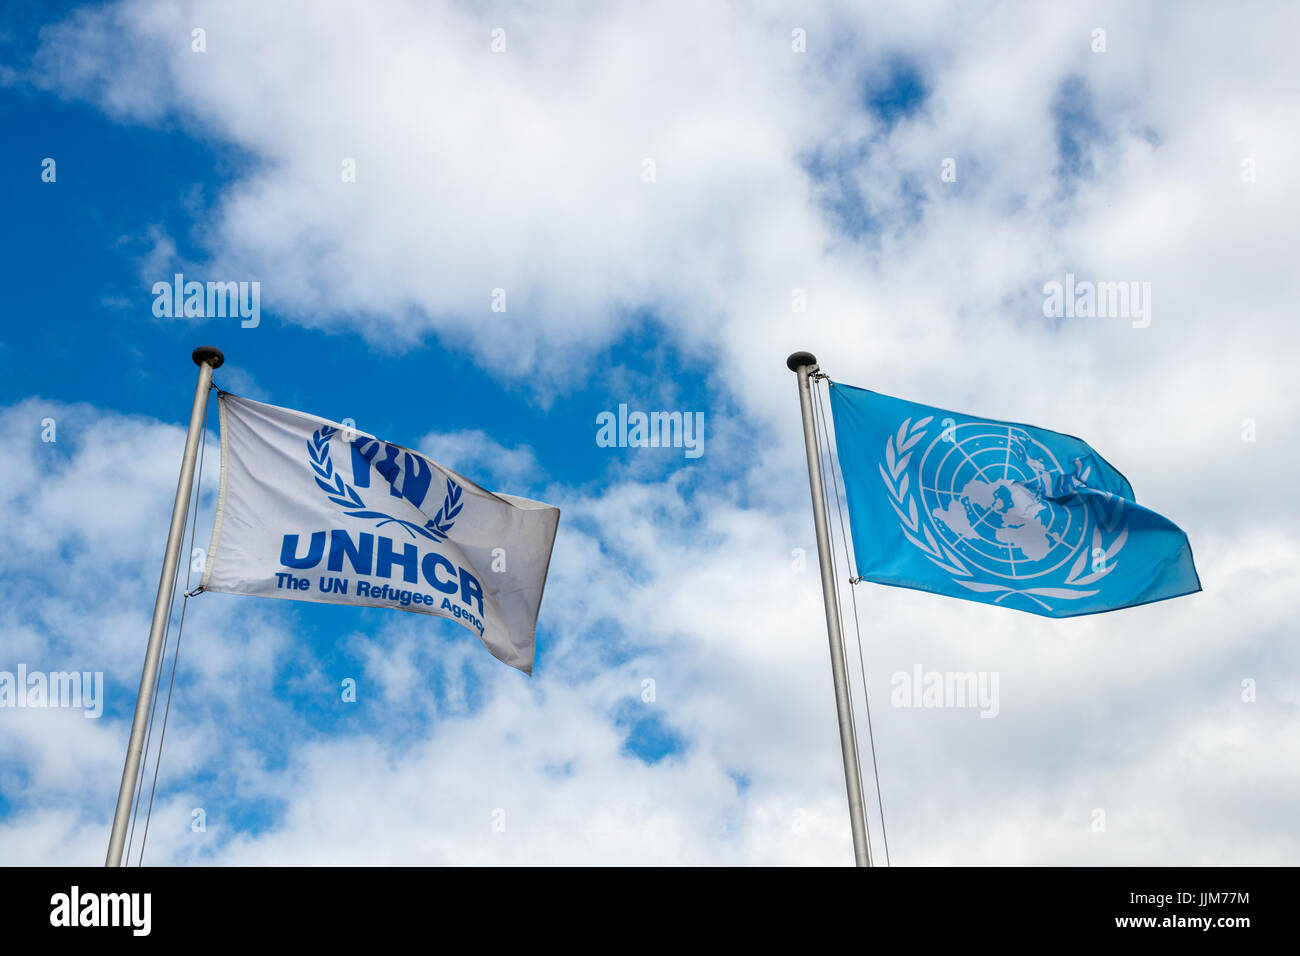 Flags of the United Nations (UN) and the United Nations High Commissioner for Refugees (UNHCR)  against a blue sky with clouds. Stock Photo